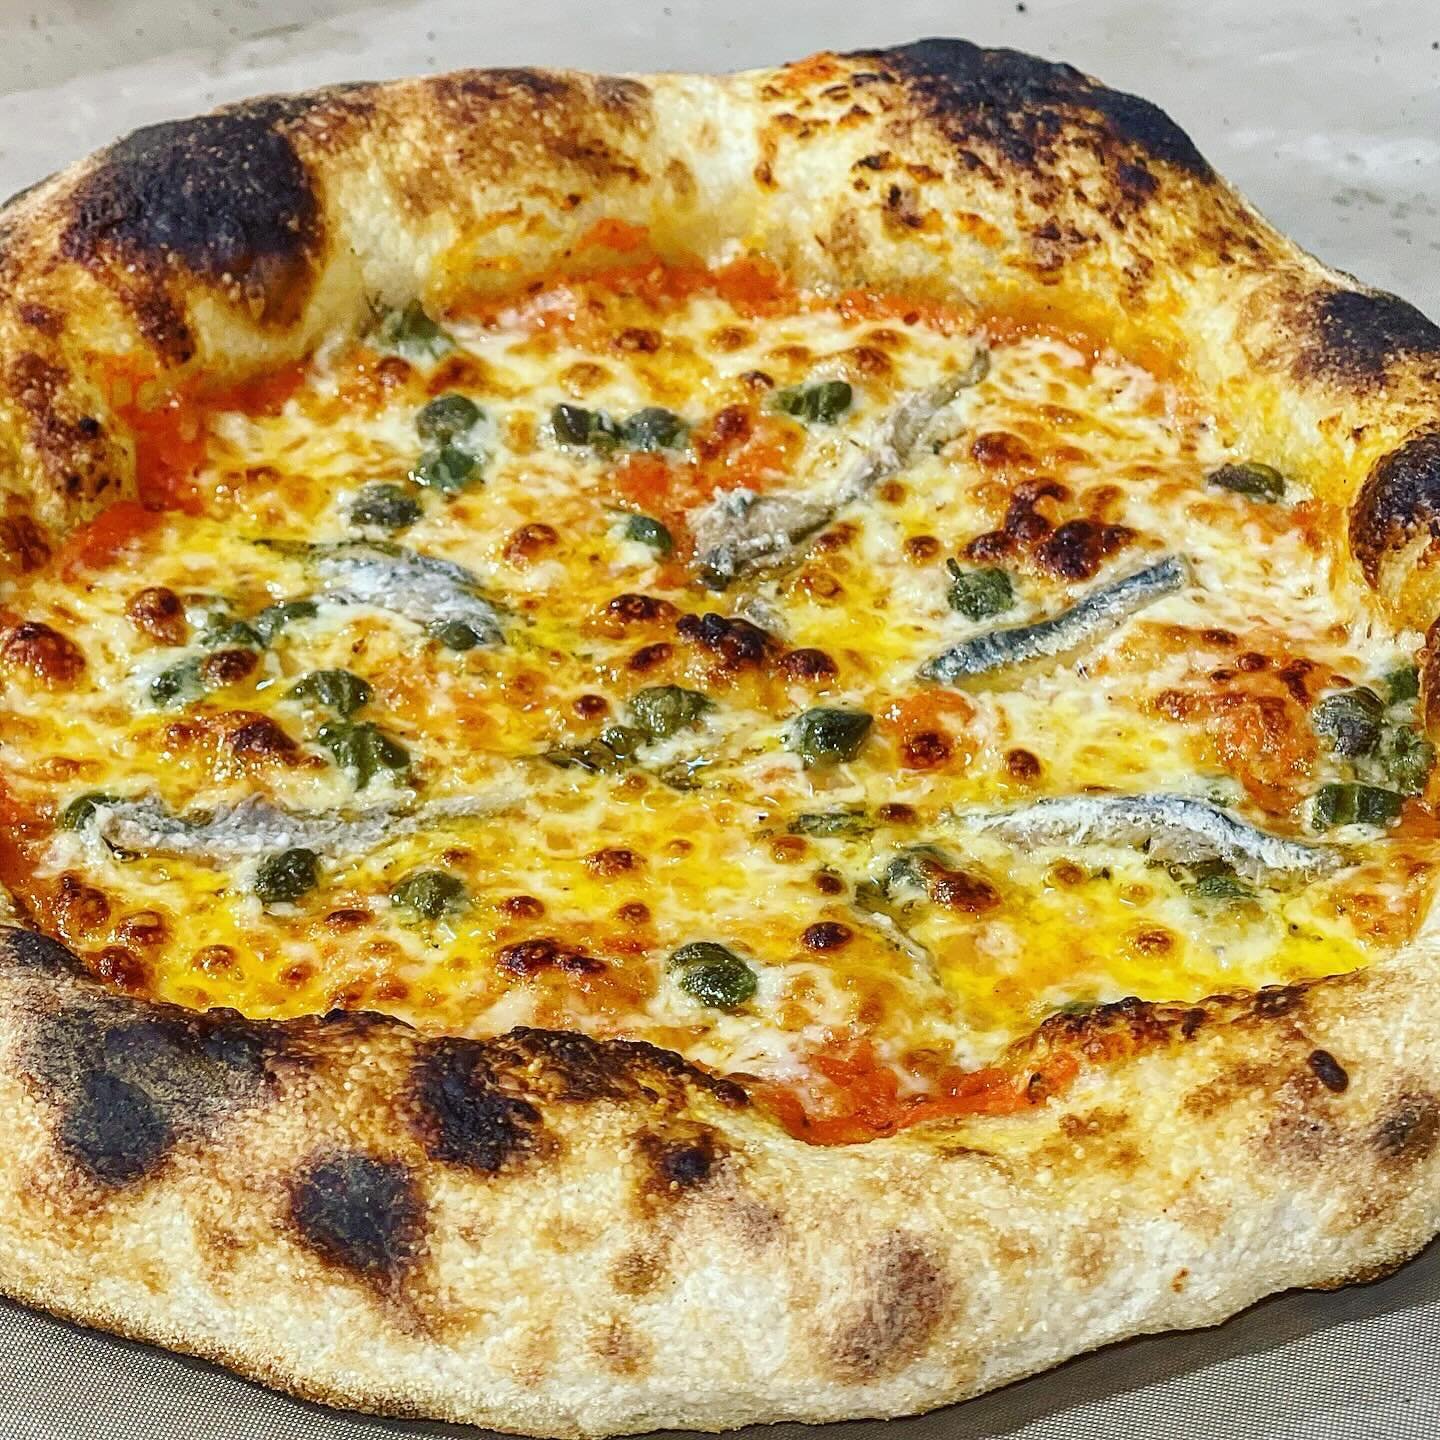 Neapolitan Pizzas🍕 available soon from #barnbakes for our @ourlifeatthebarn guests😎 #ourlifeatthebarn #agrotourismo #pizzatime #lovepizza #barnbakes